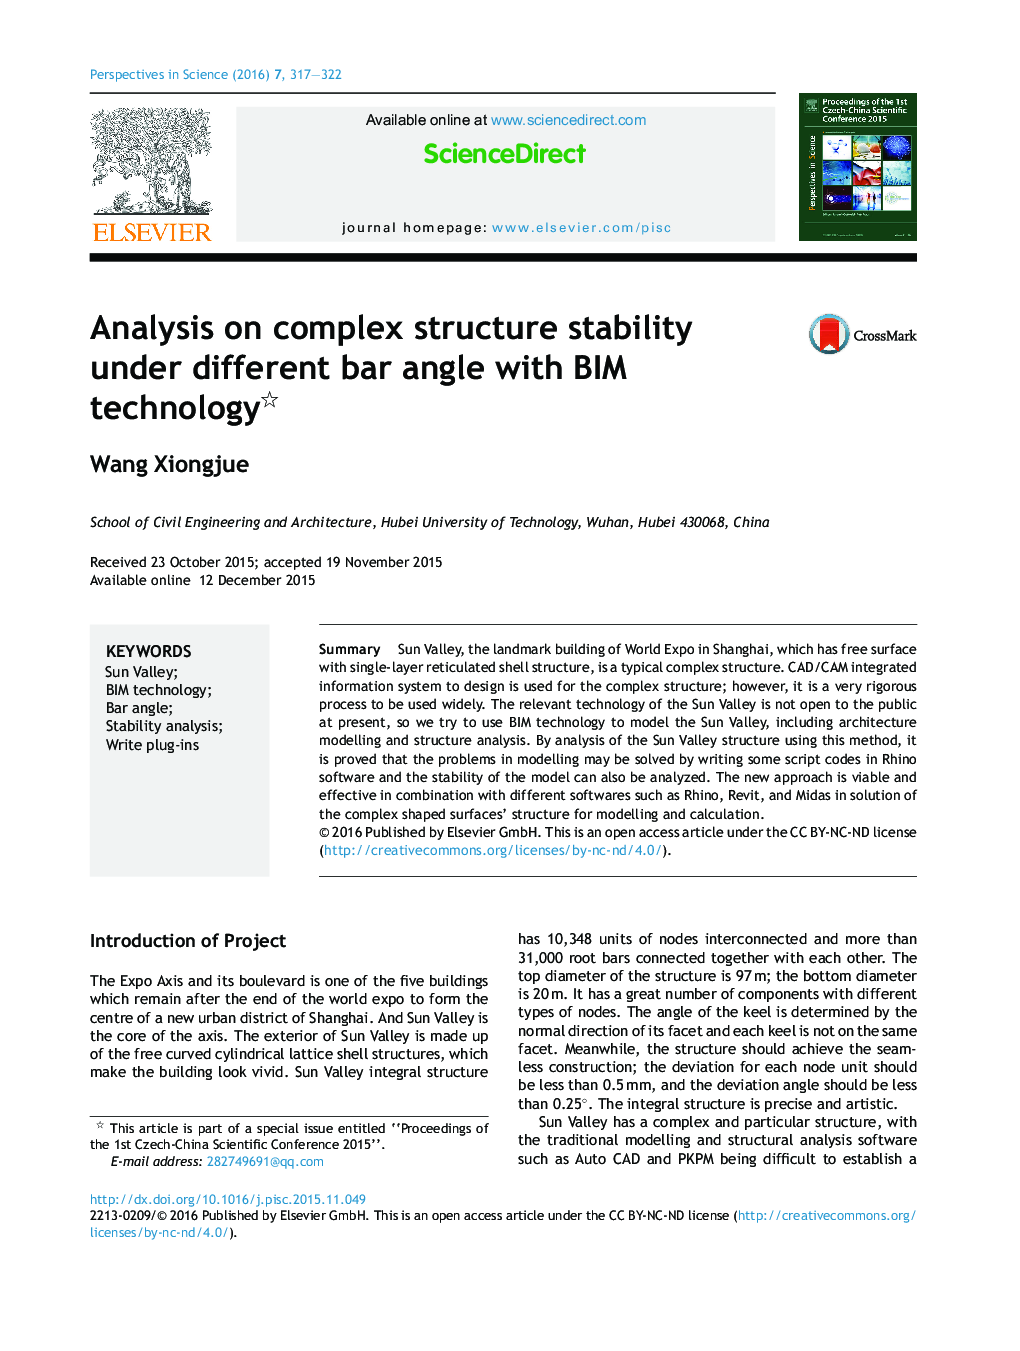 Analysis on complex structure stability under different bar angle with BIM technology 